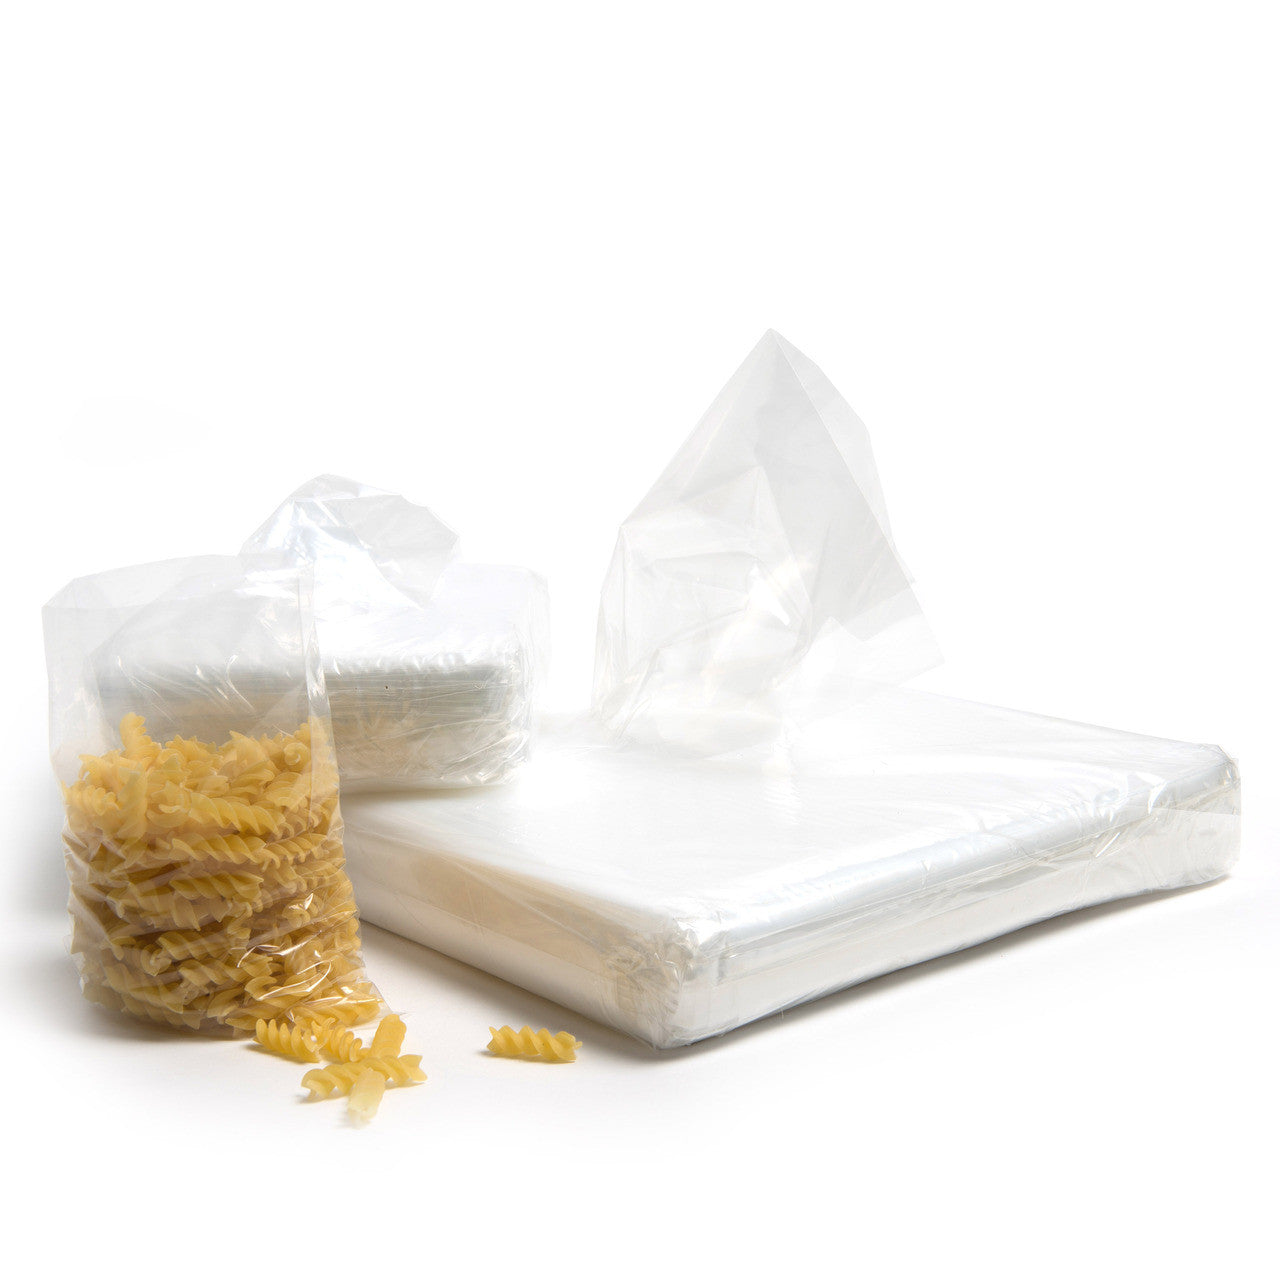 clear 120g LDPE polythene bags 